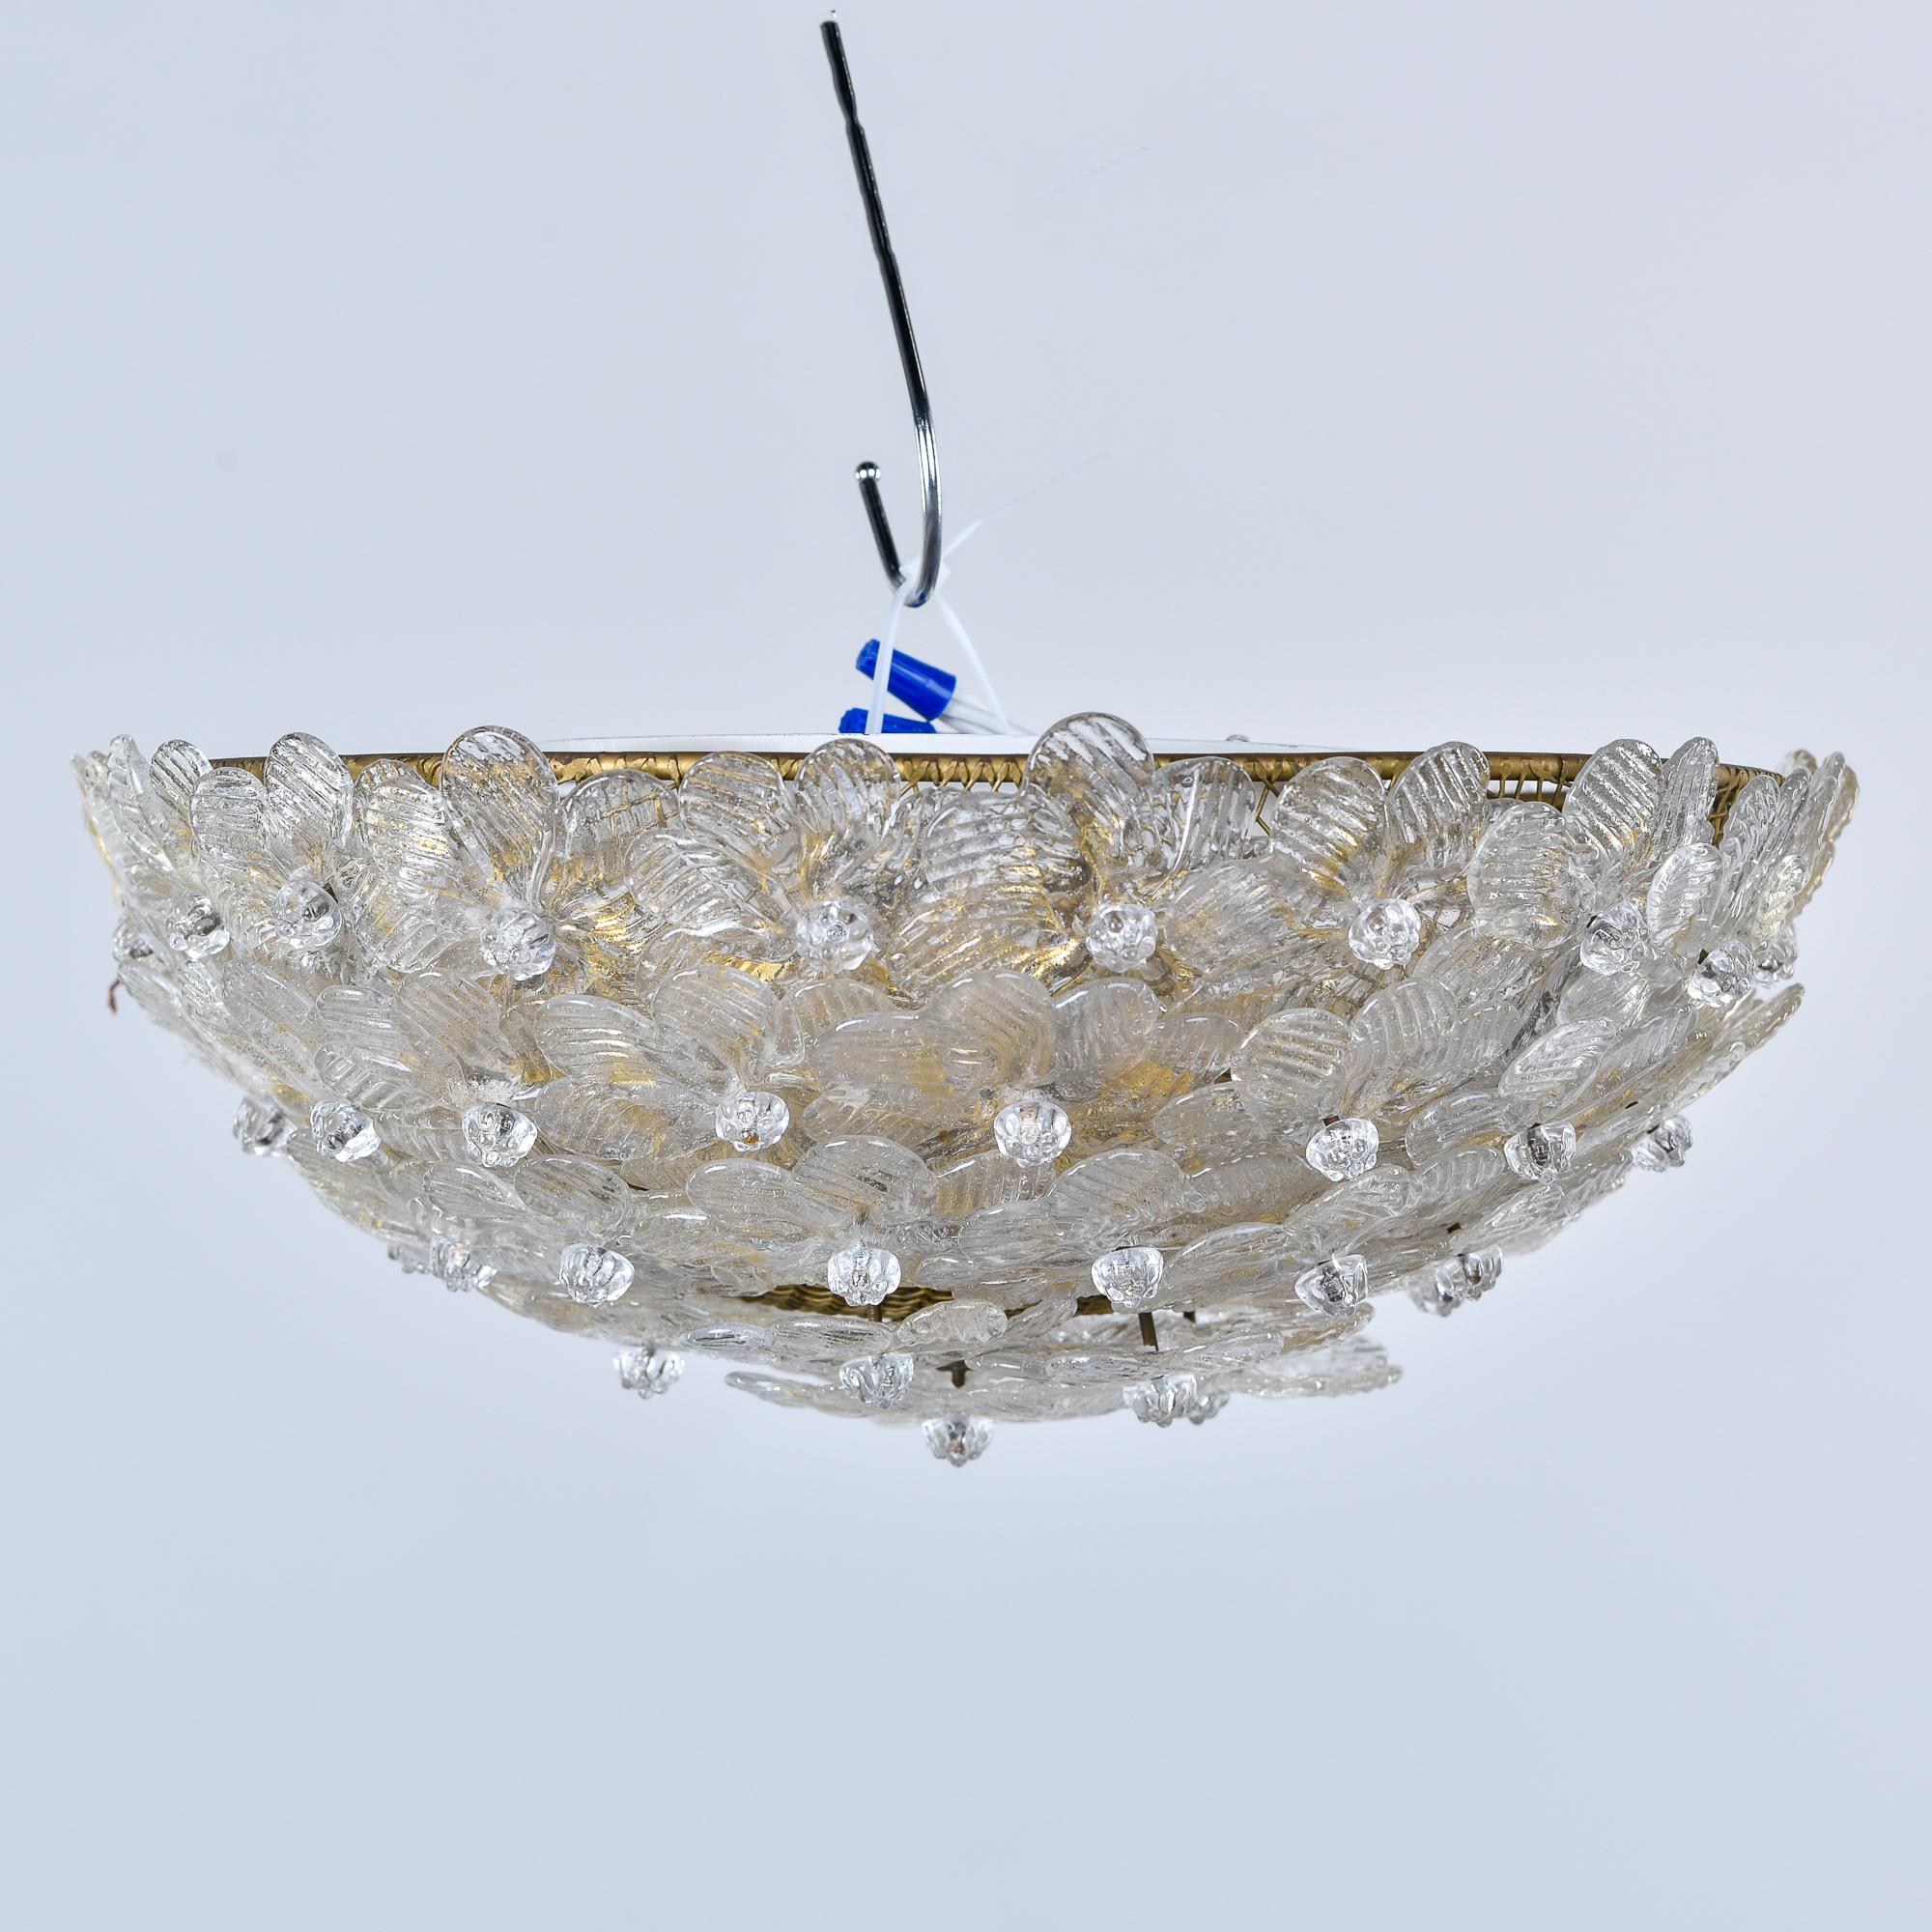 Found in Italy, this circa 1970s flush mount fixture is attributed to Barovier. Bowl-shaped fixture is covered in clear and gold Murano glass flowers and has three internal candelabra-sized sockets that have been rewired for US electrical standards.